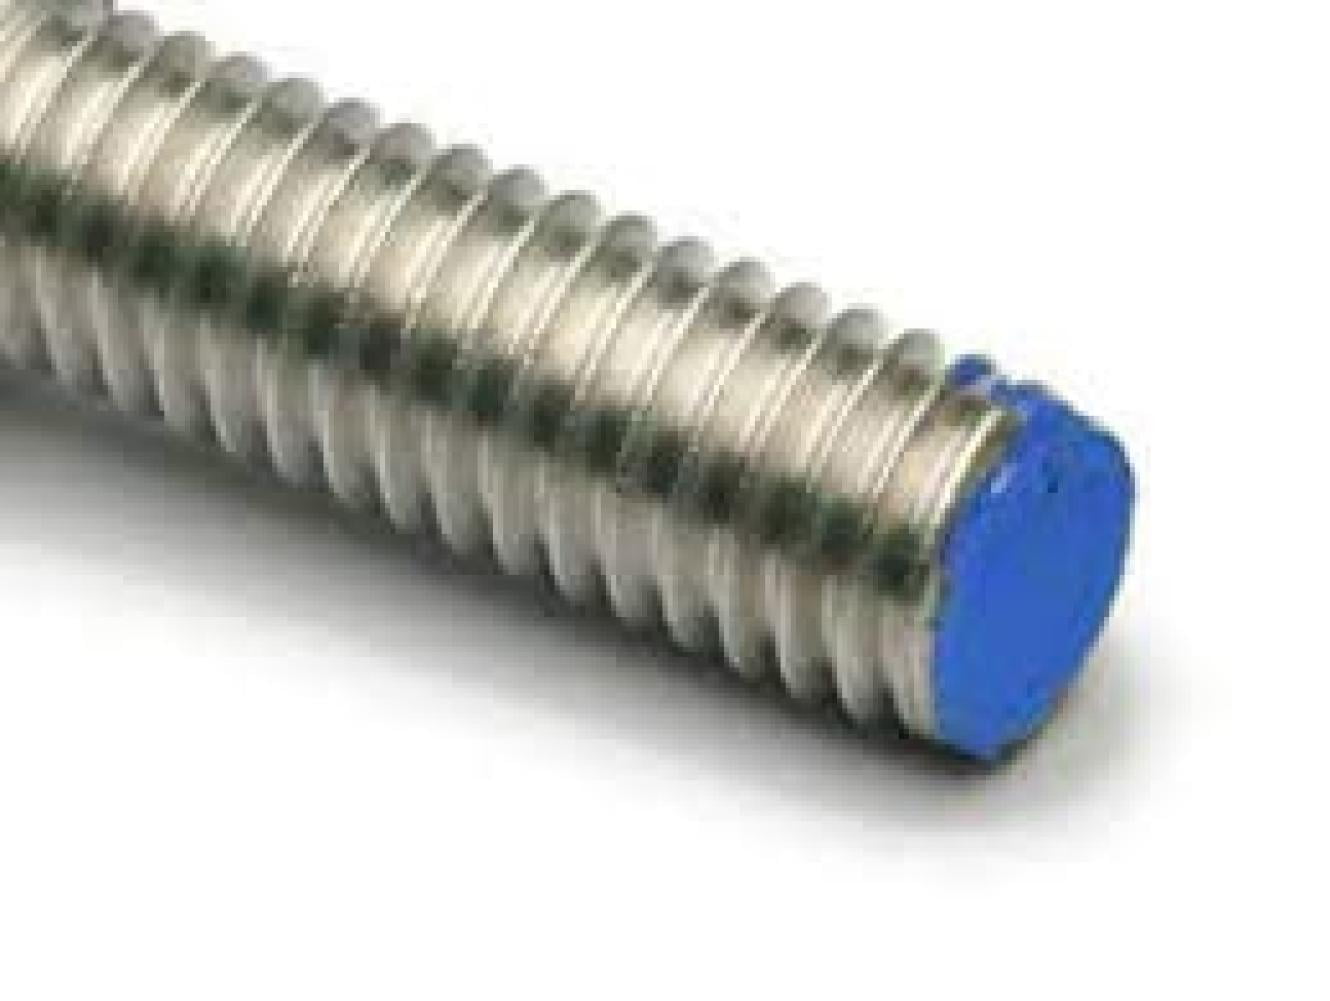 18-8 Stainless Steel Threaded Rod 1/2-13 x 3 Ft Stick 